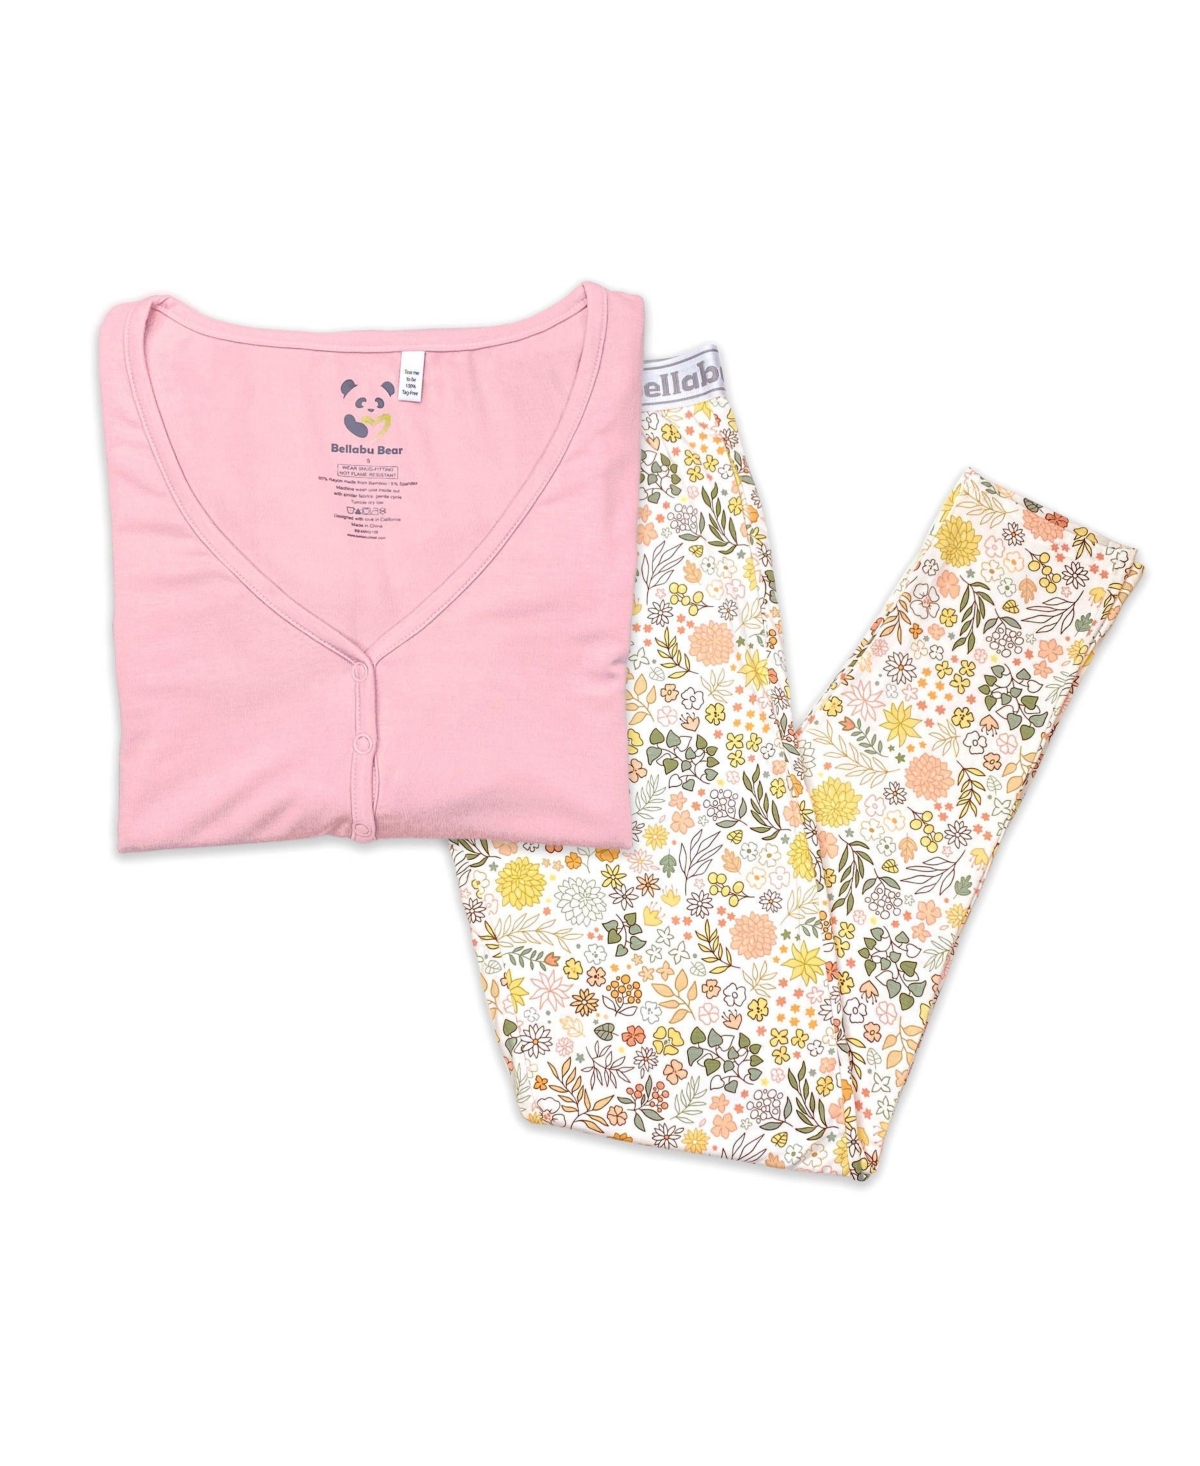 Women's Fall Floral Set of 2 Piece Pajamas - Fall floral